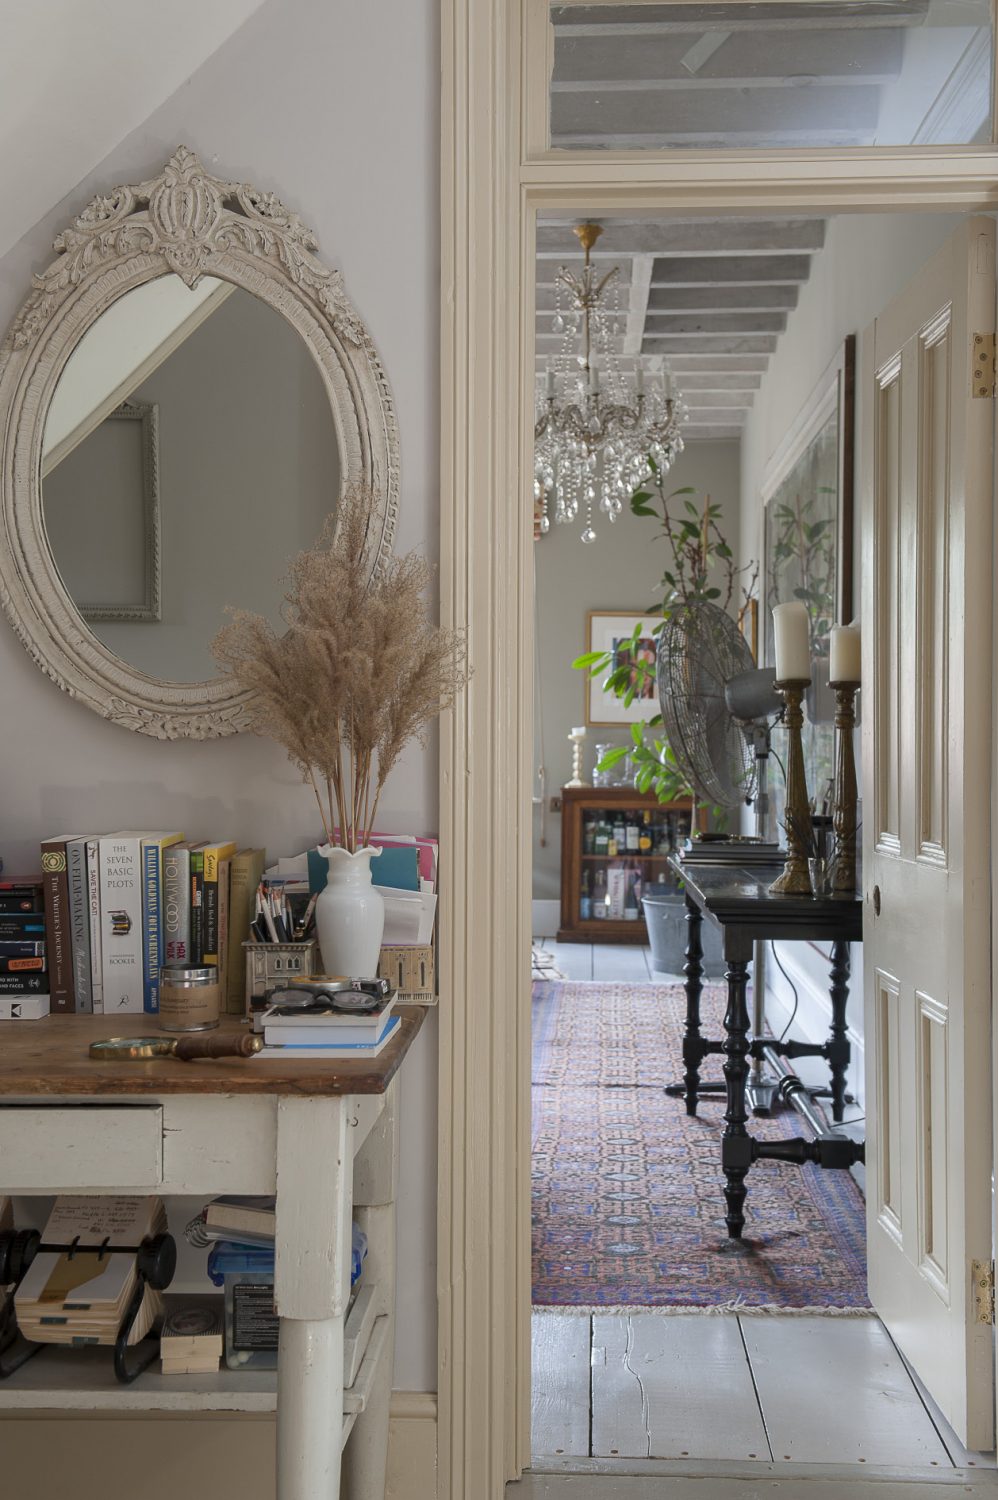 Vintage mirrors, carefully placed, are key to this light and bright home